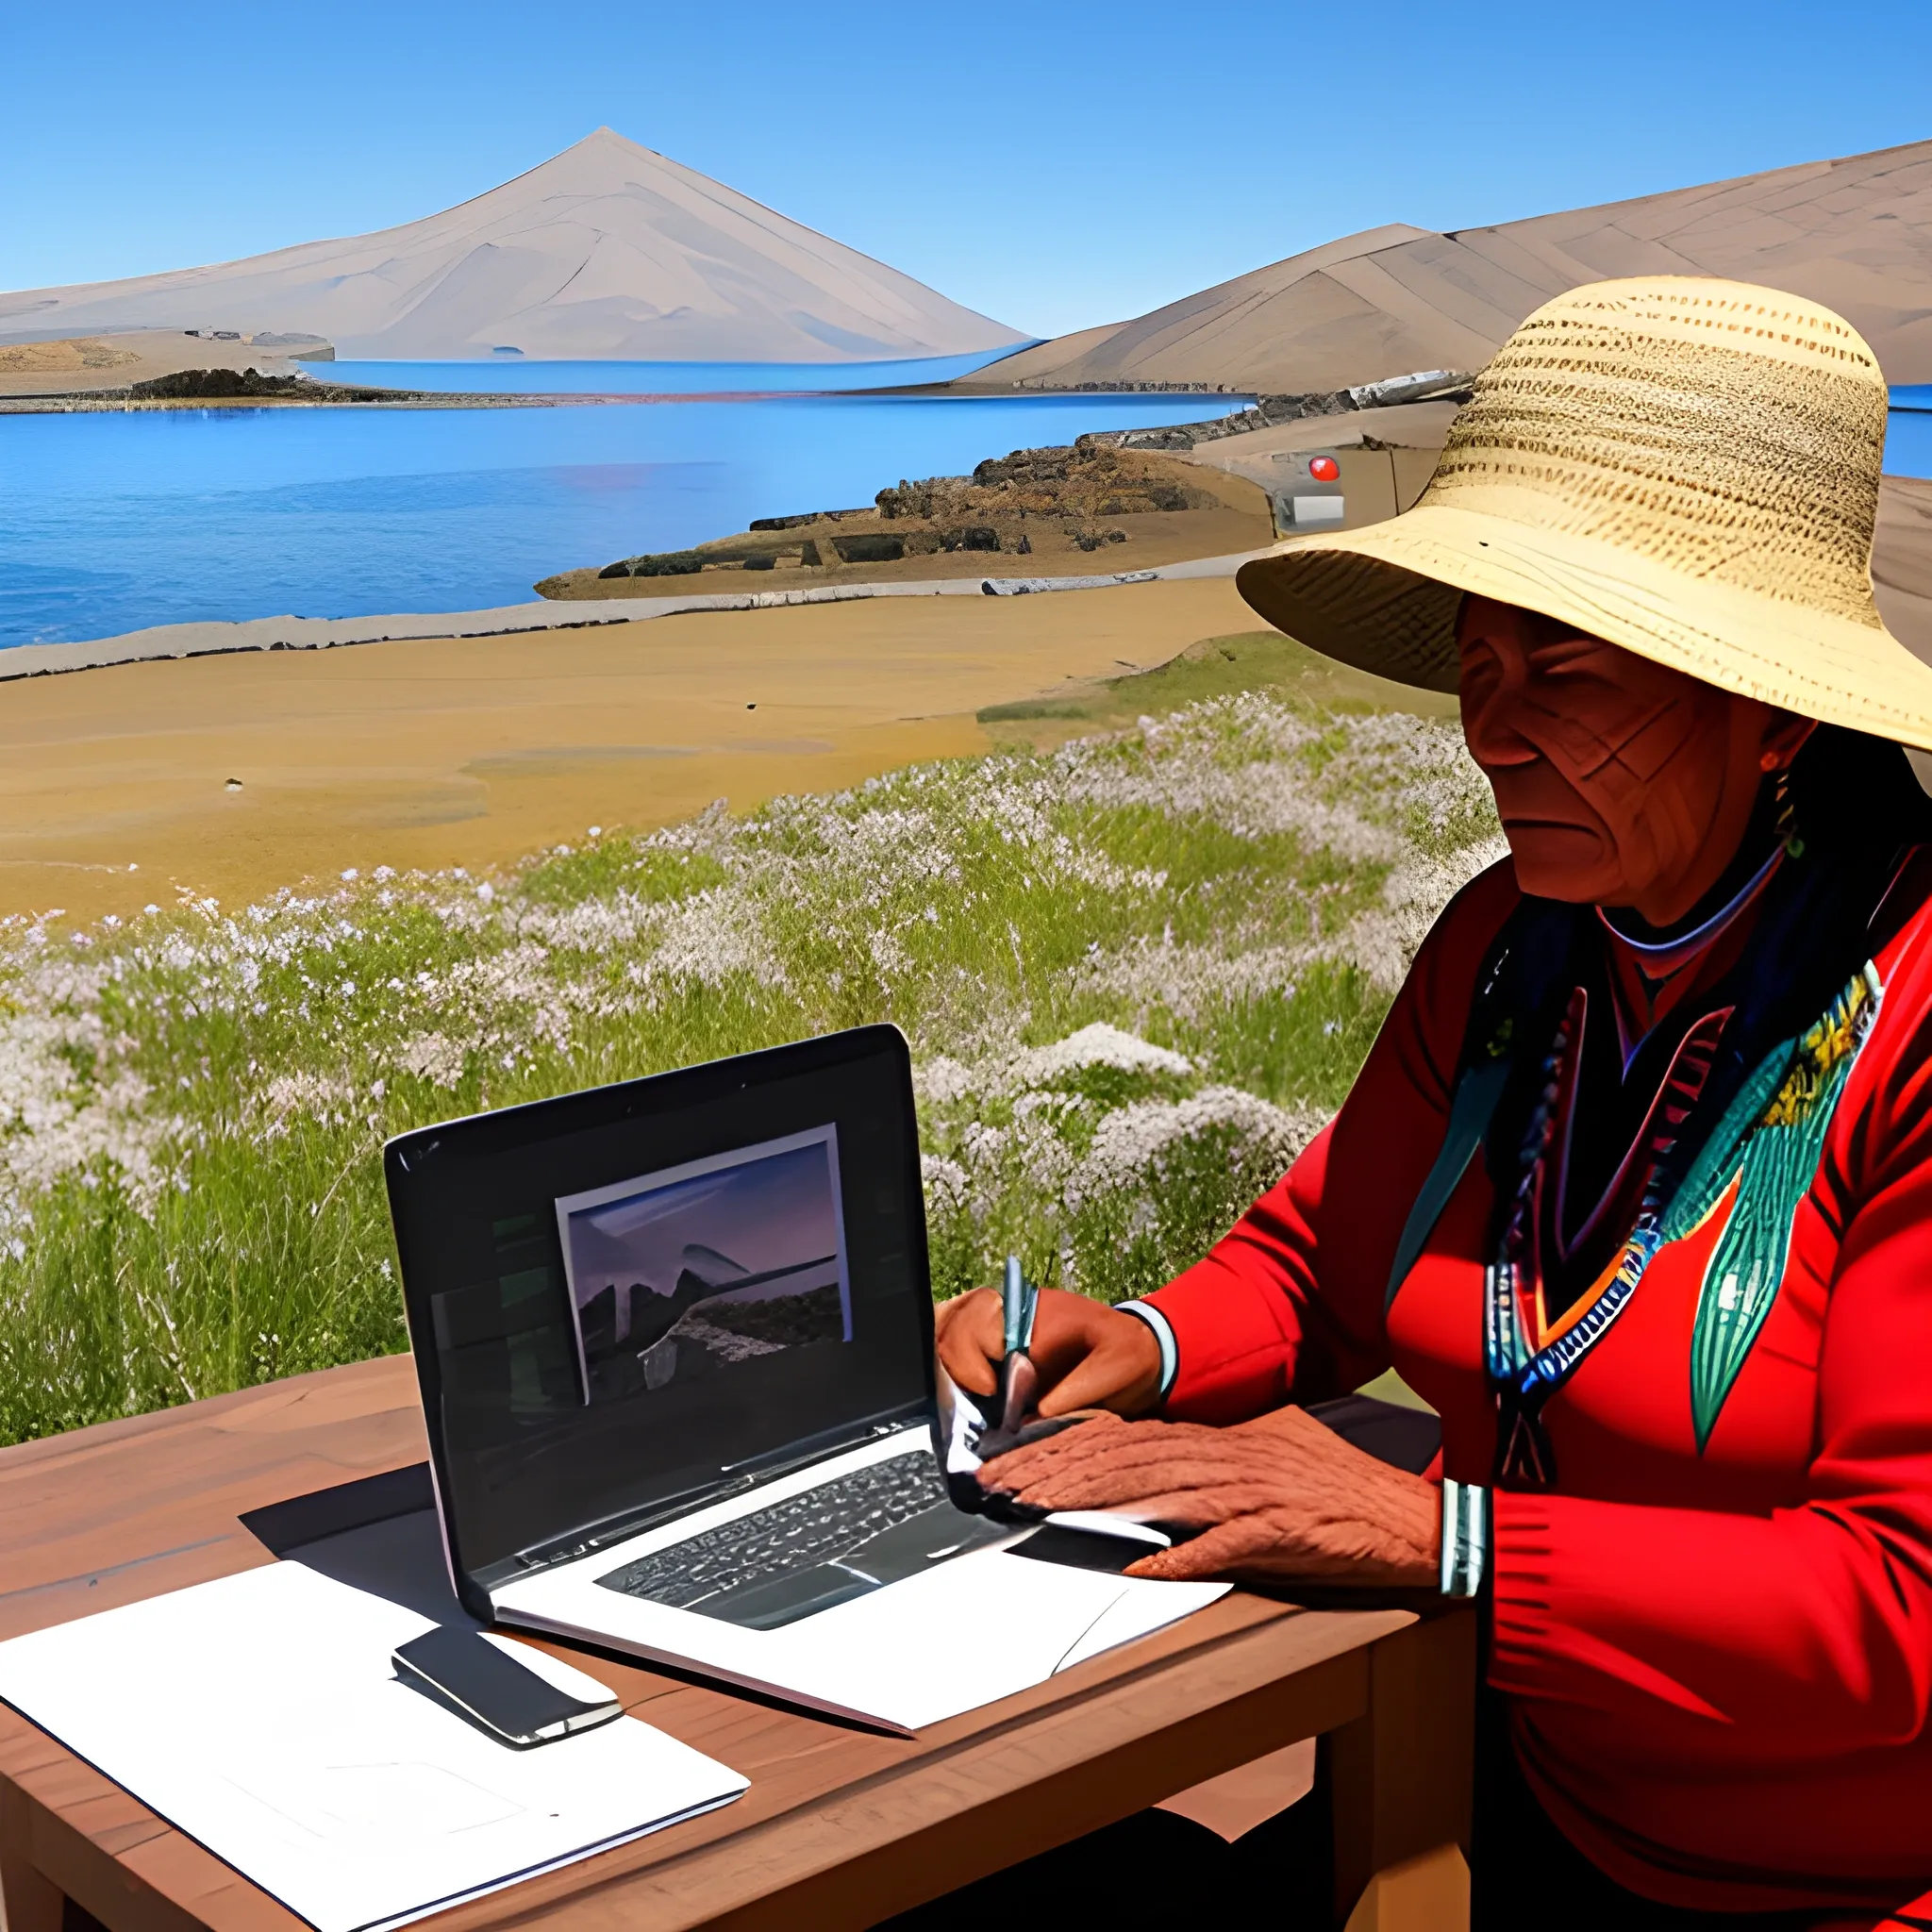 Indigenous children studying with a computer on the shores of Lake Titicaca
